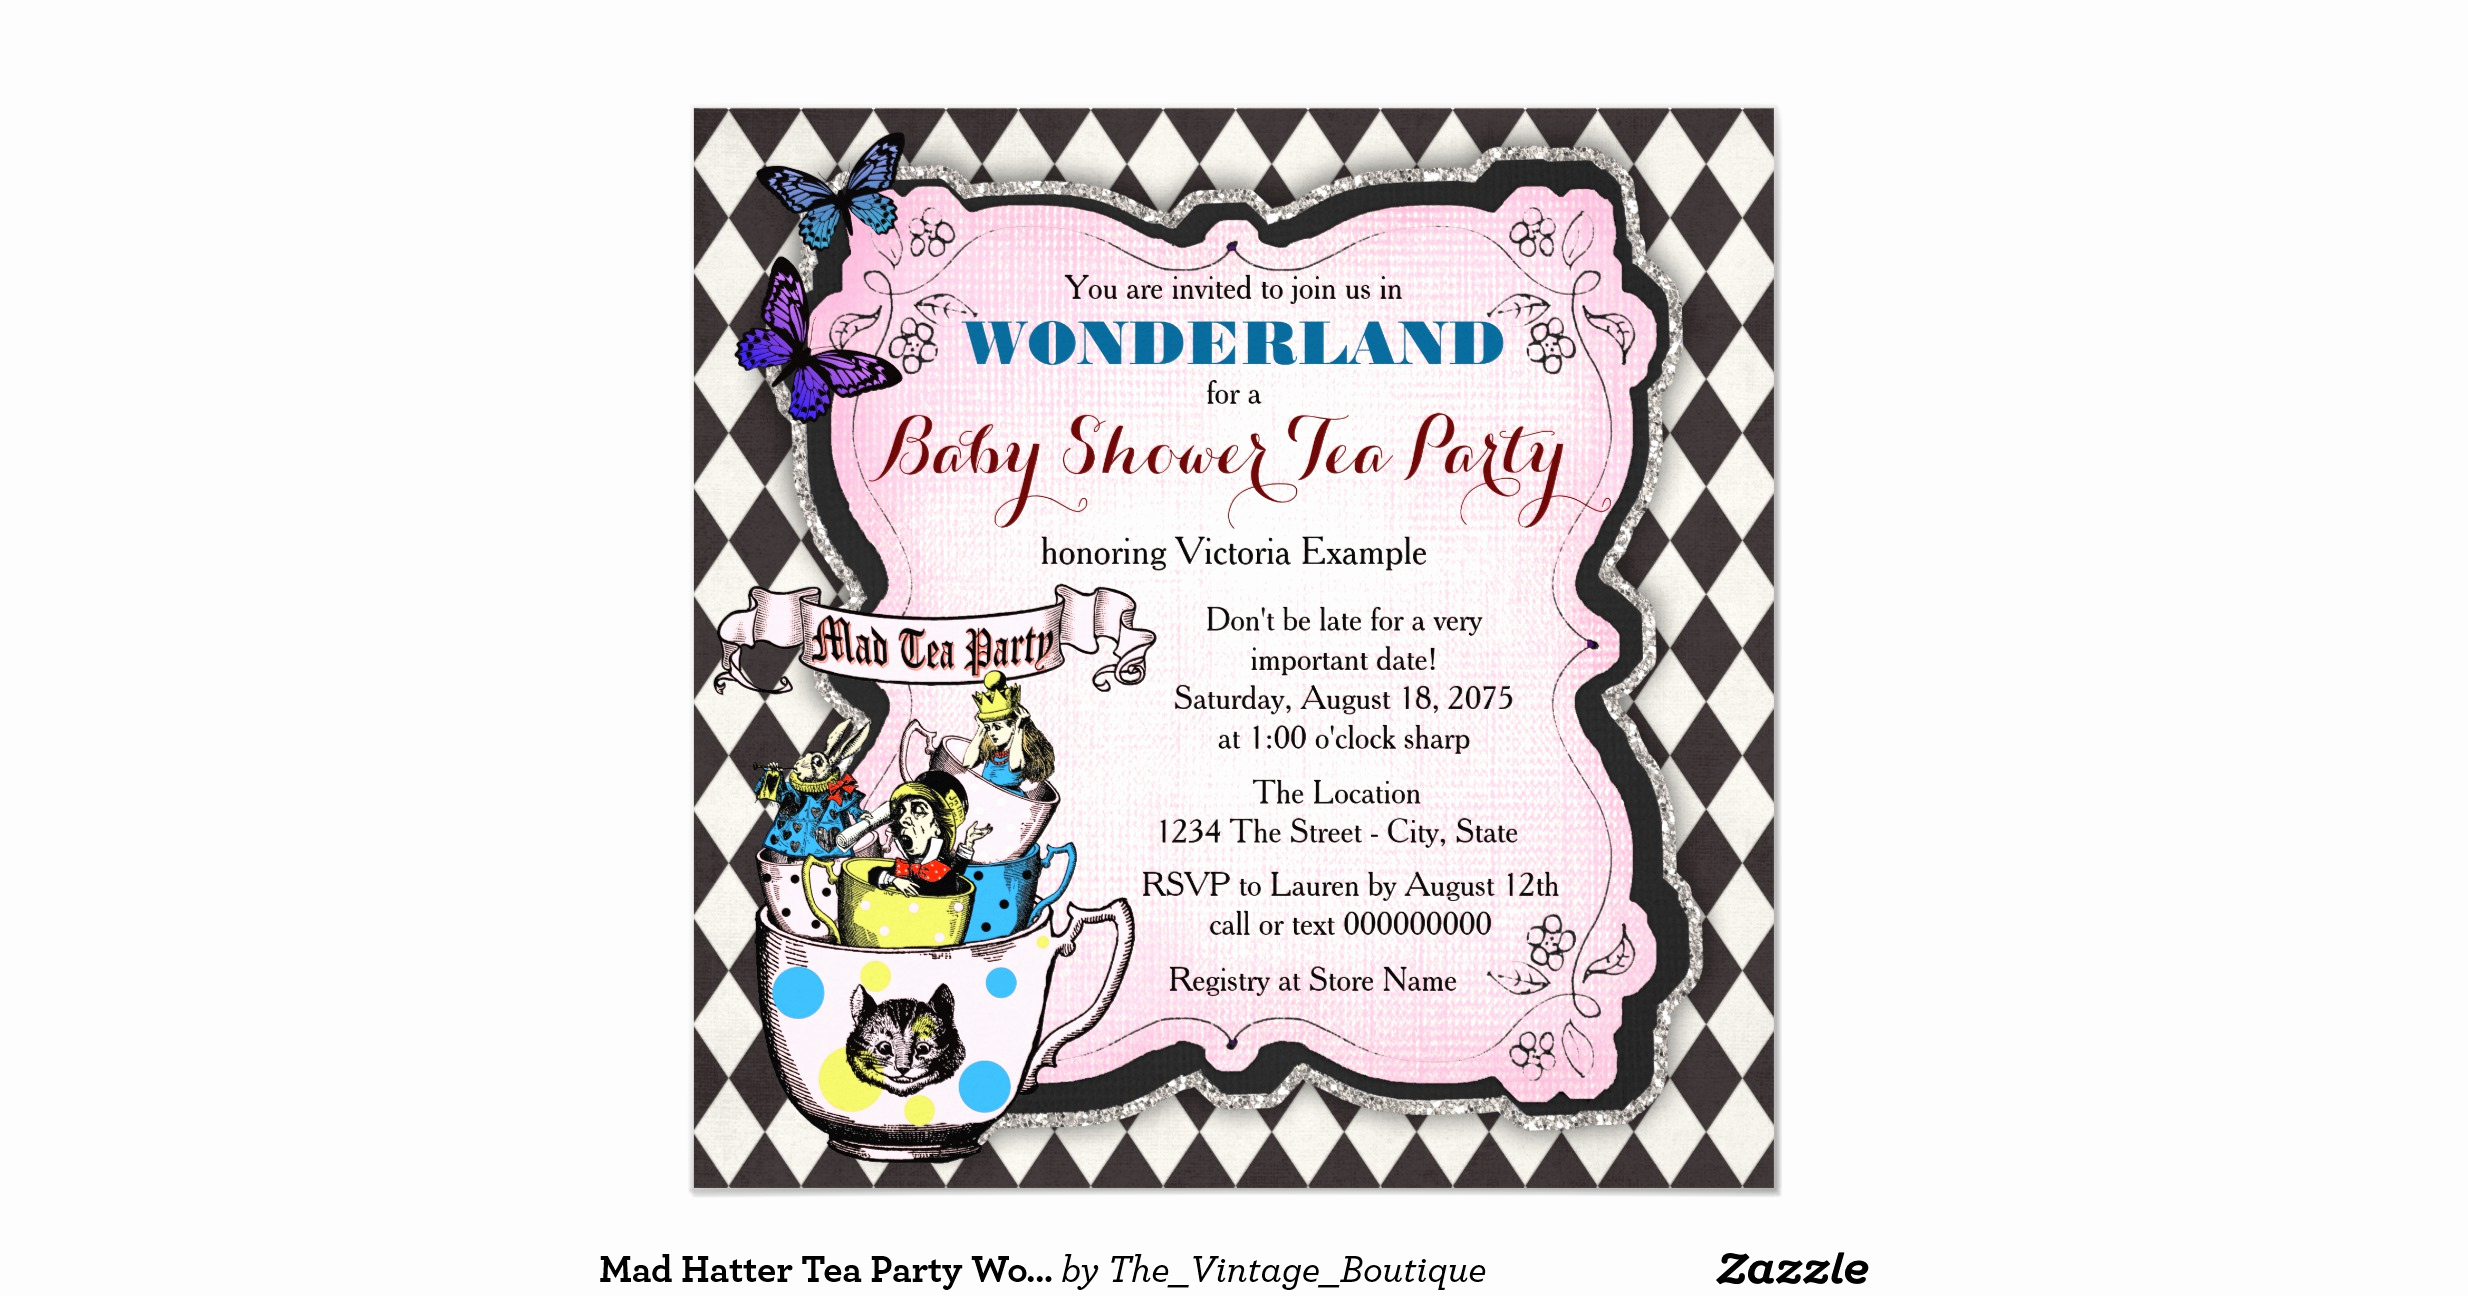 Mad Hatter Tea Party Invitation Awesome Mad Hatter Tea Party Wonderland Baby Shower Invitation